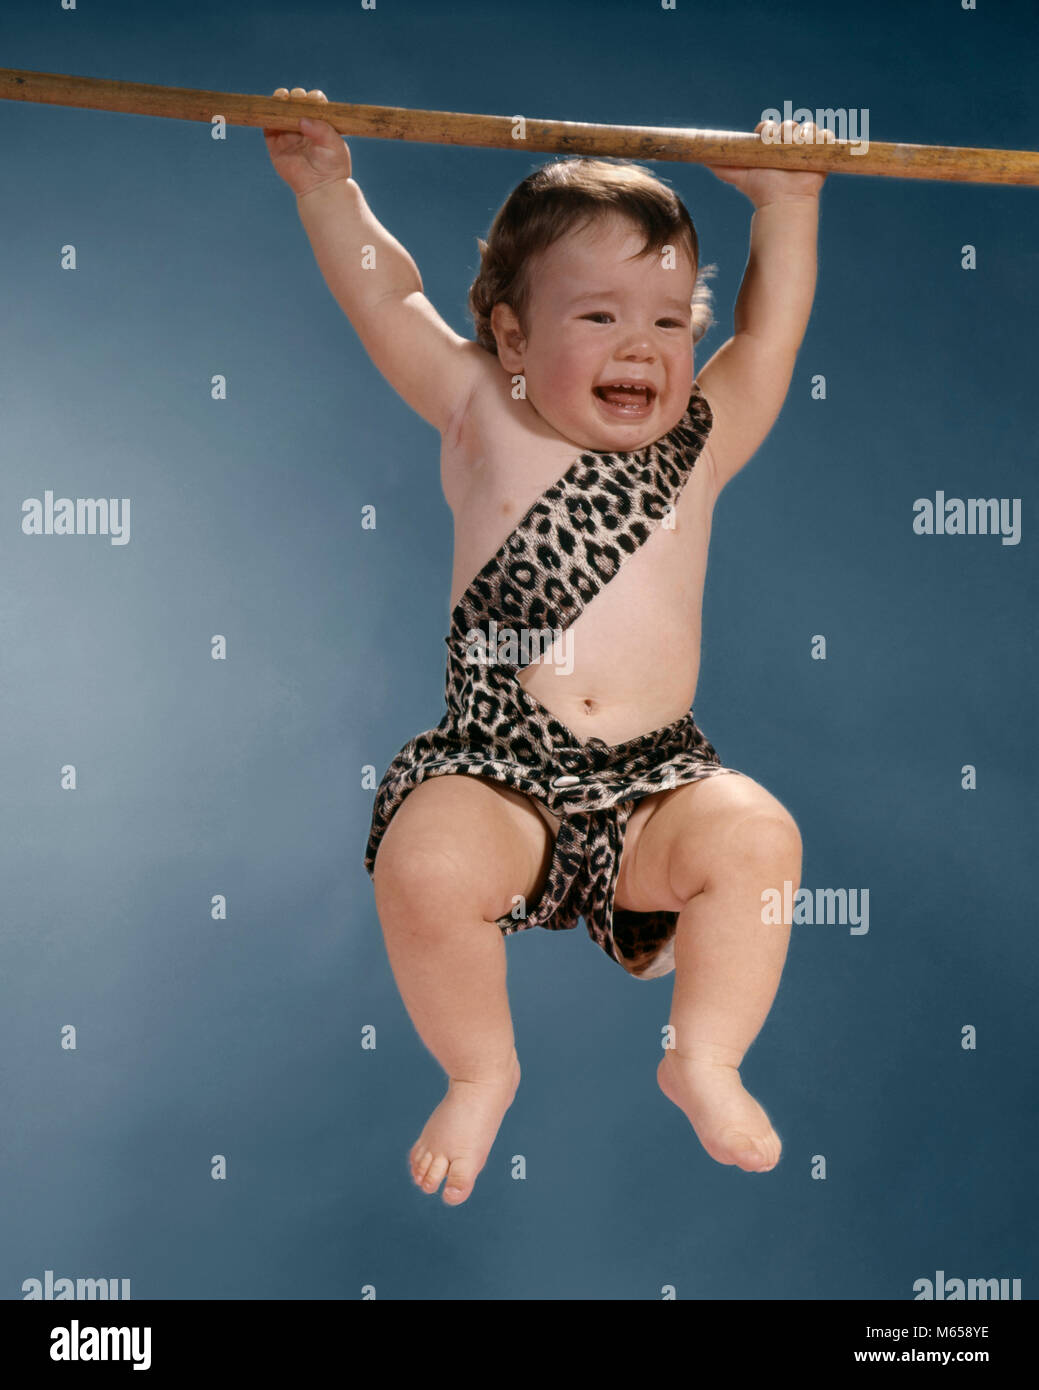 1960S CRYING BABY IN LEOPARD SKIN TARZAN SUIT SWINGING FROM A BRANCH -  kb4870 HAR001 HARS 1-2 YEARS ADVENTURE DANGEROUS COURAGE EXCITEMENT LOW  ANGLE TARZAN SWINGING HANG BABY BOY SYMBOLIC 6-12 MONTHS